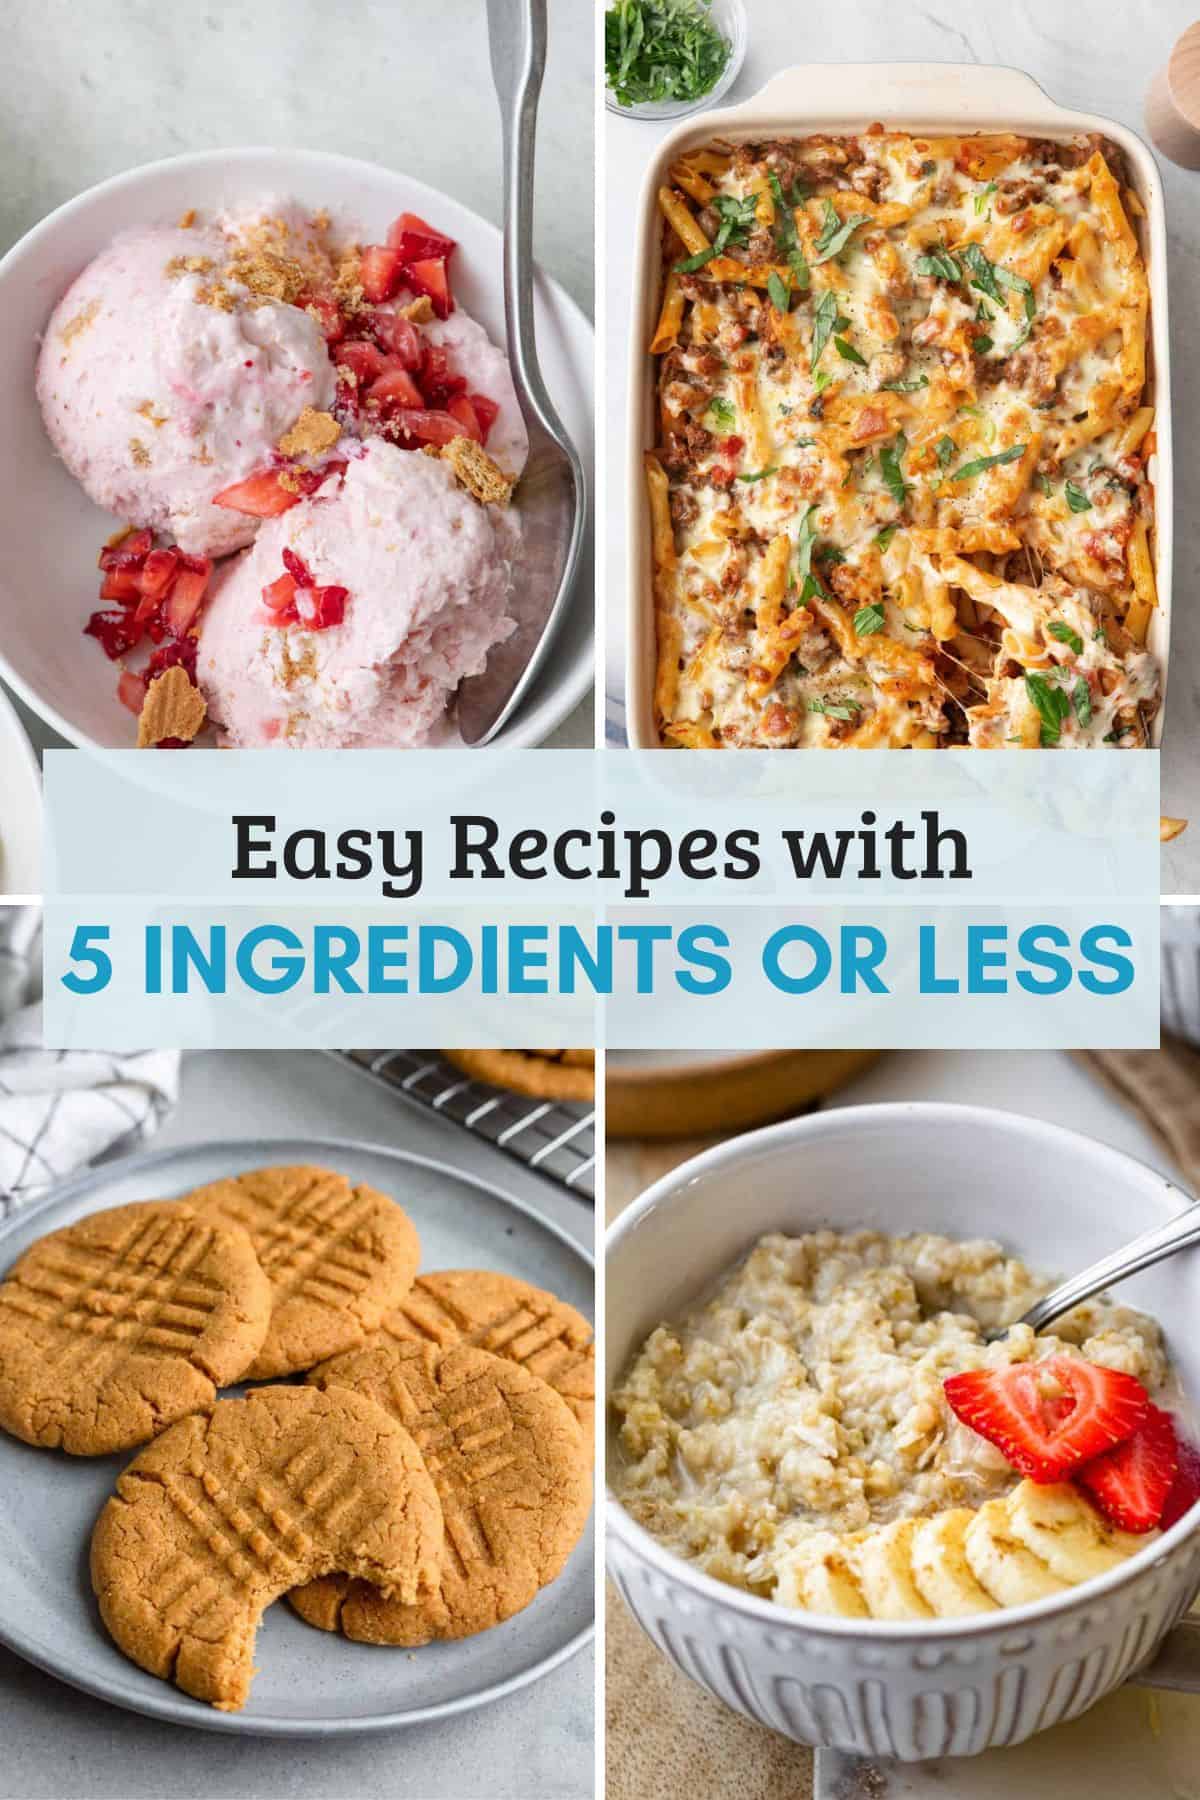 https://feelgoodfoodie.net/wp-content/uploads/2023/04/RoundUp_5_Ingredient_Recipes_Featured.jpg